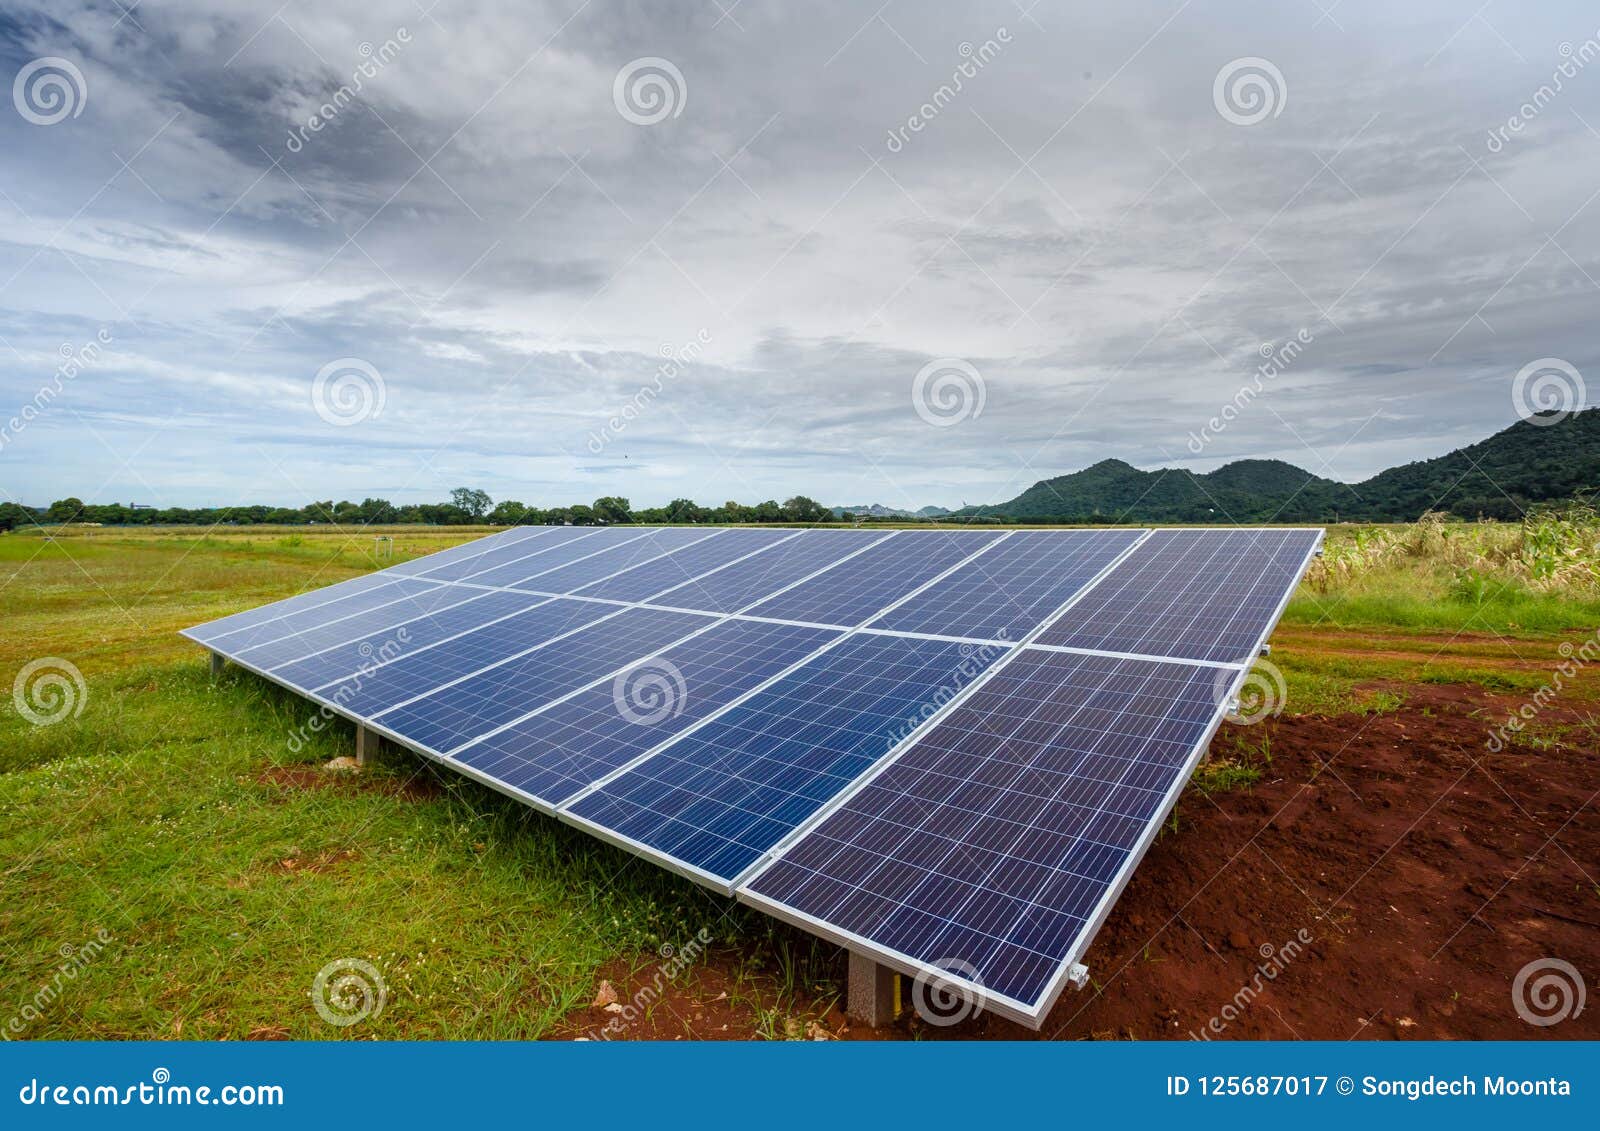 solar cell for agricultural plots